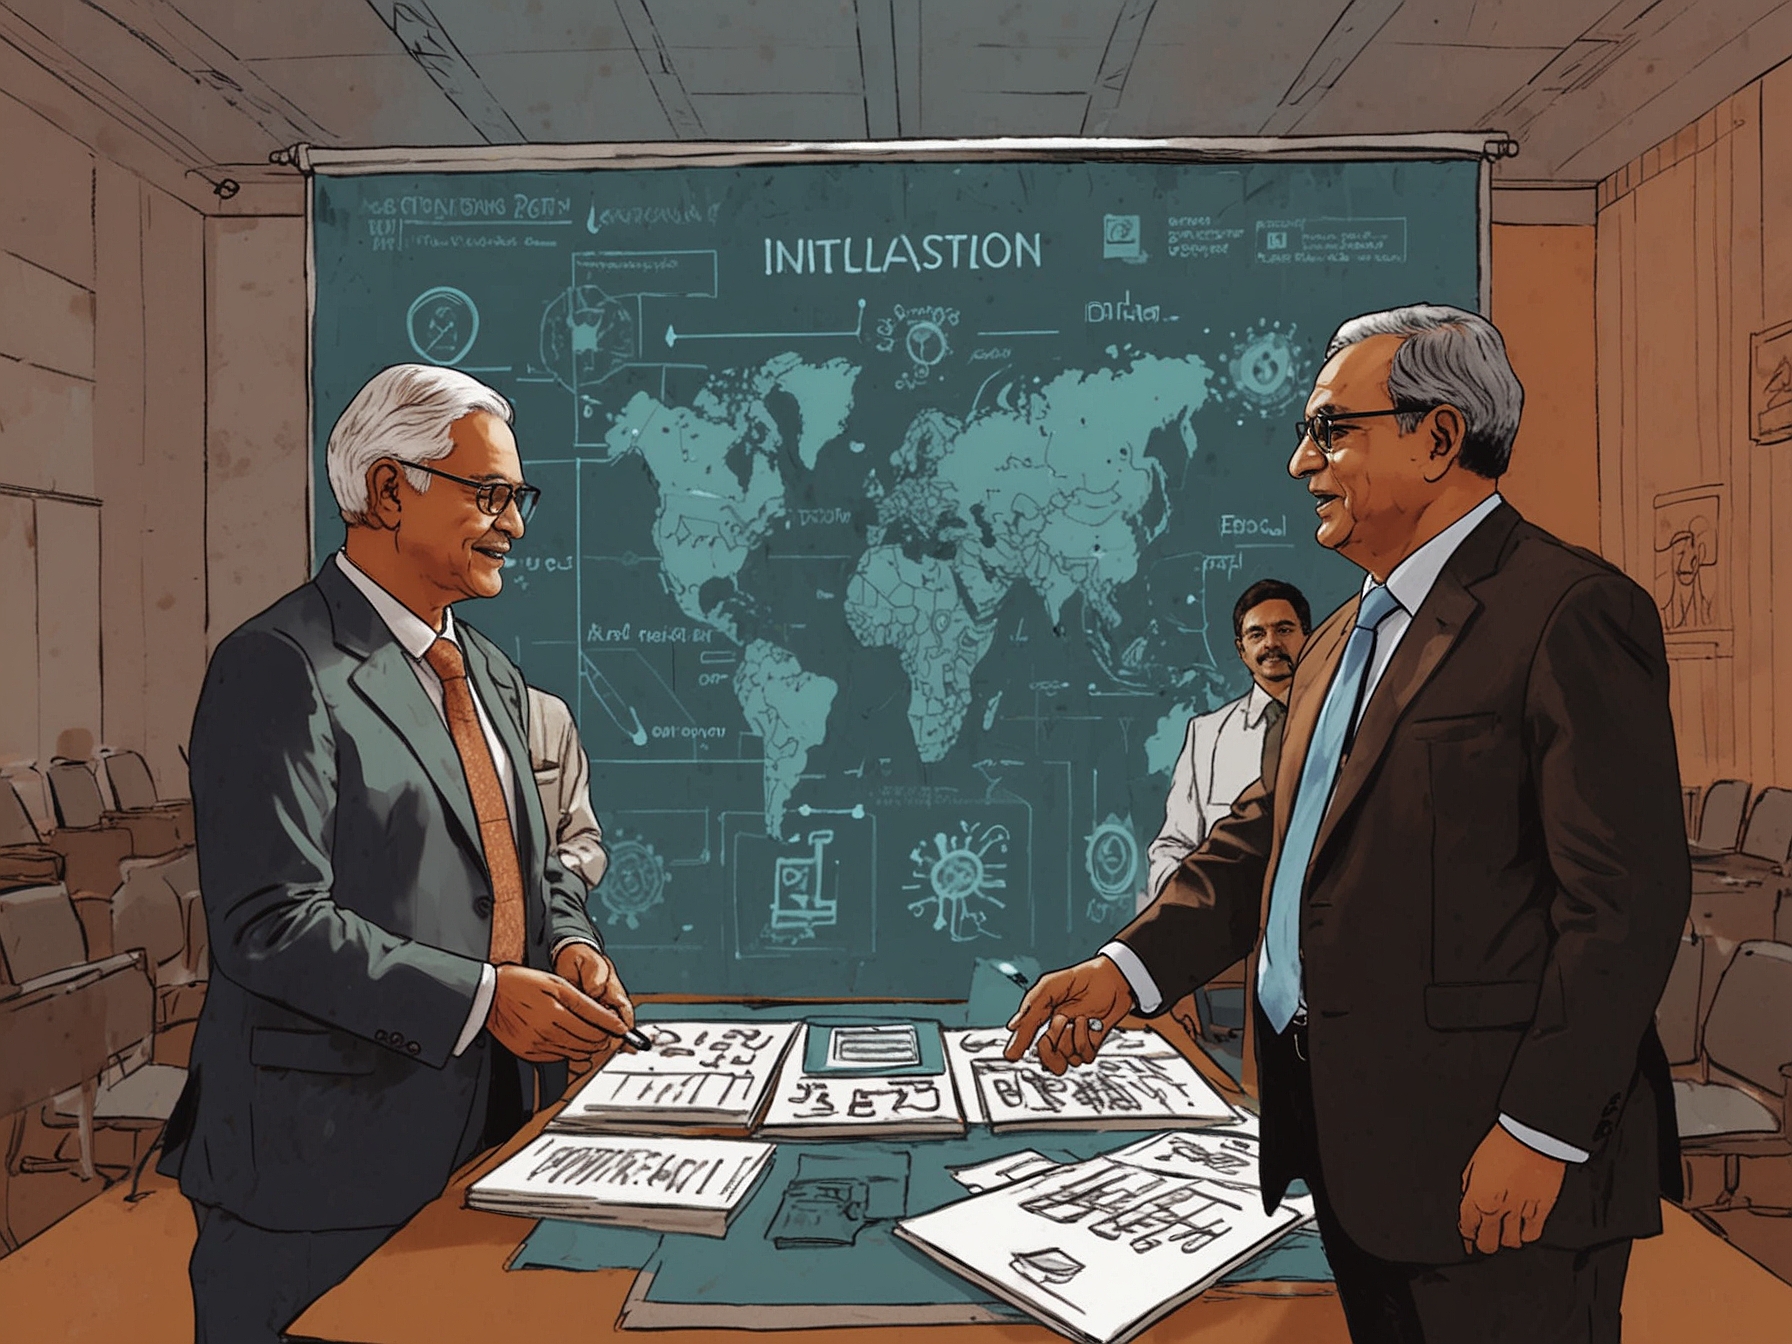 An illustration of the Indian government introducing a new deep tech policy, showcasing various stakeholders such as startups, investors, and state officials collaborating.